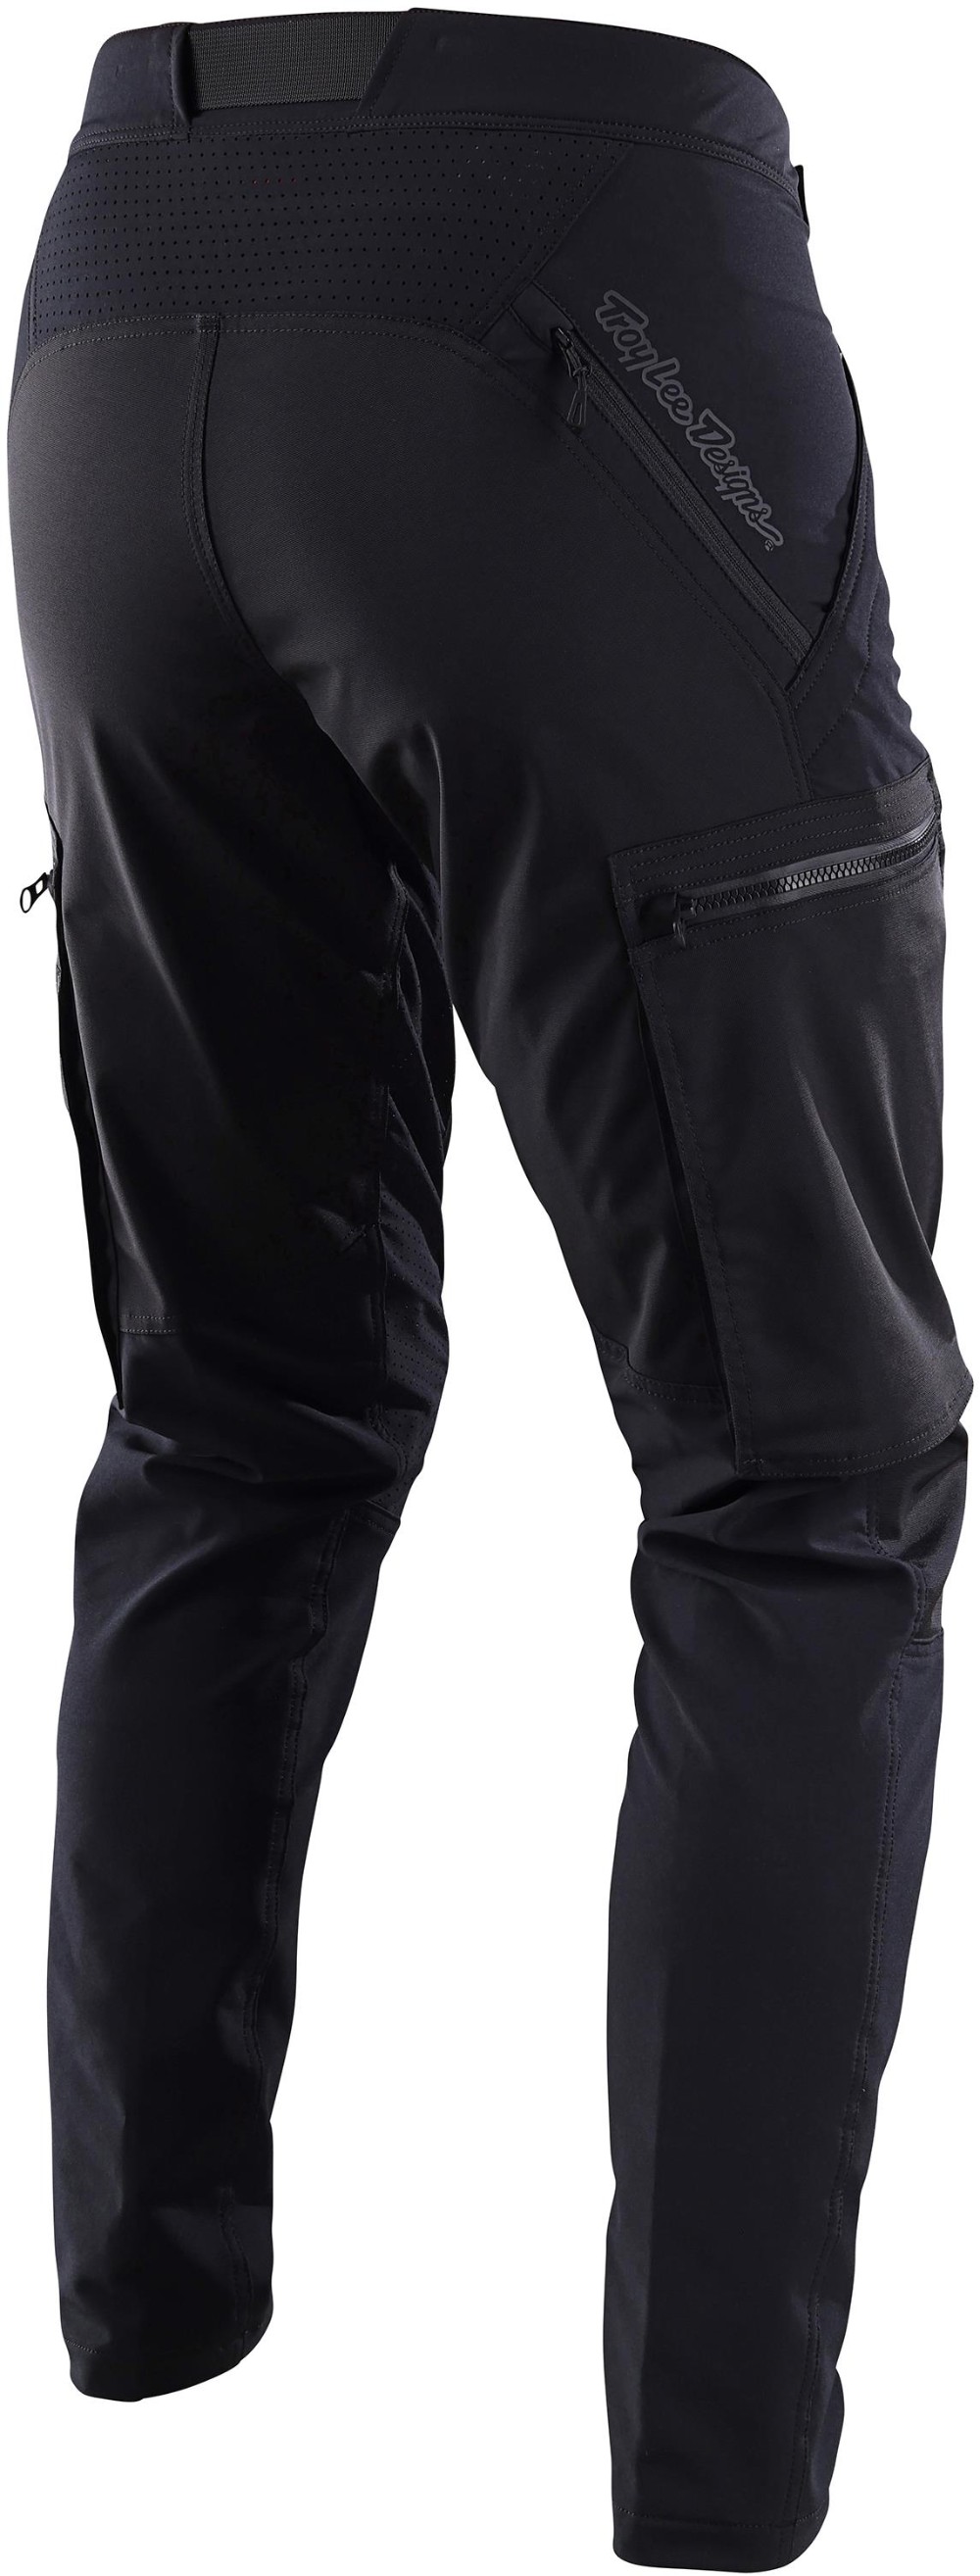 Ruckus Cargo MTB Cycling Trousers image 1